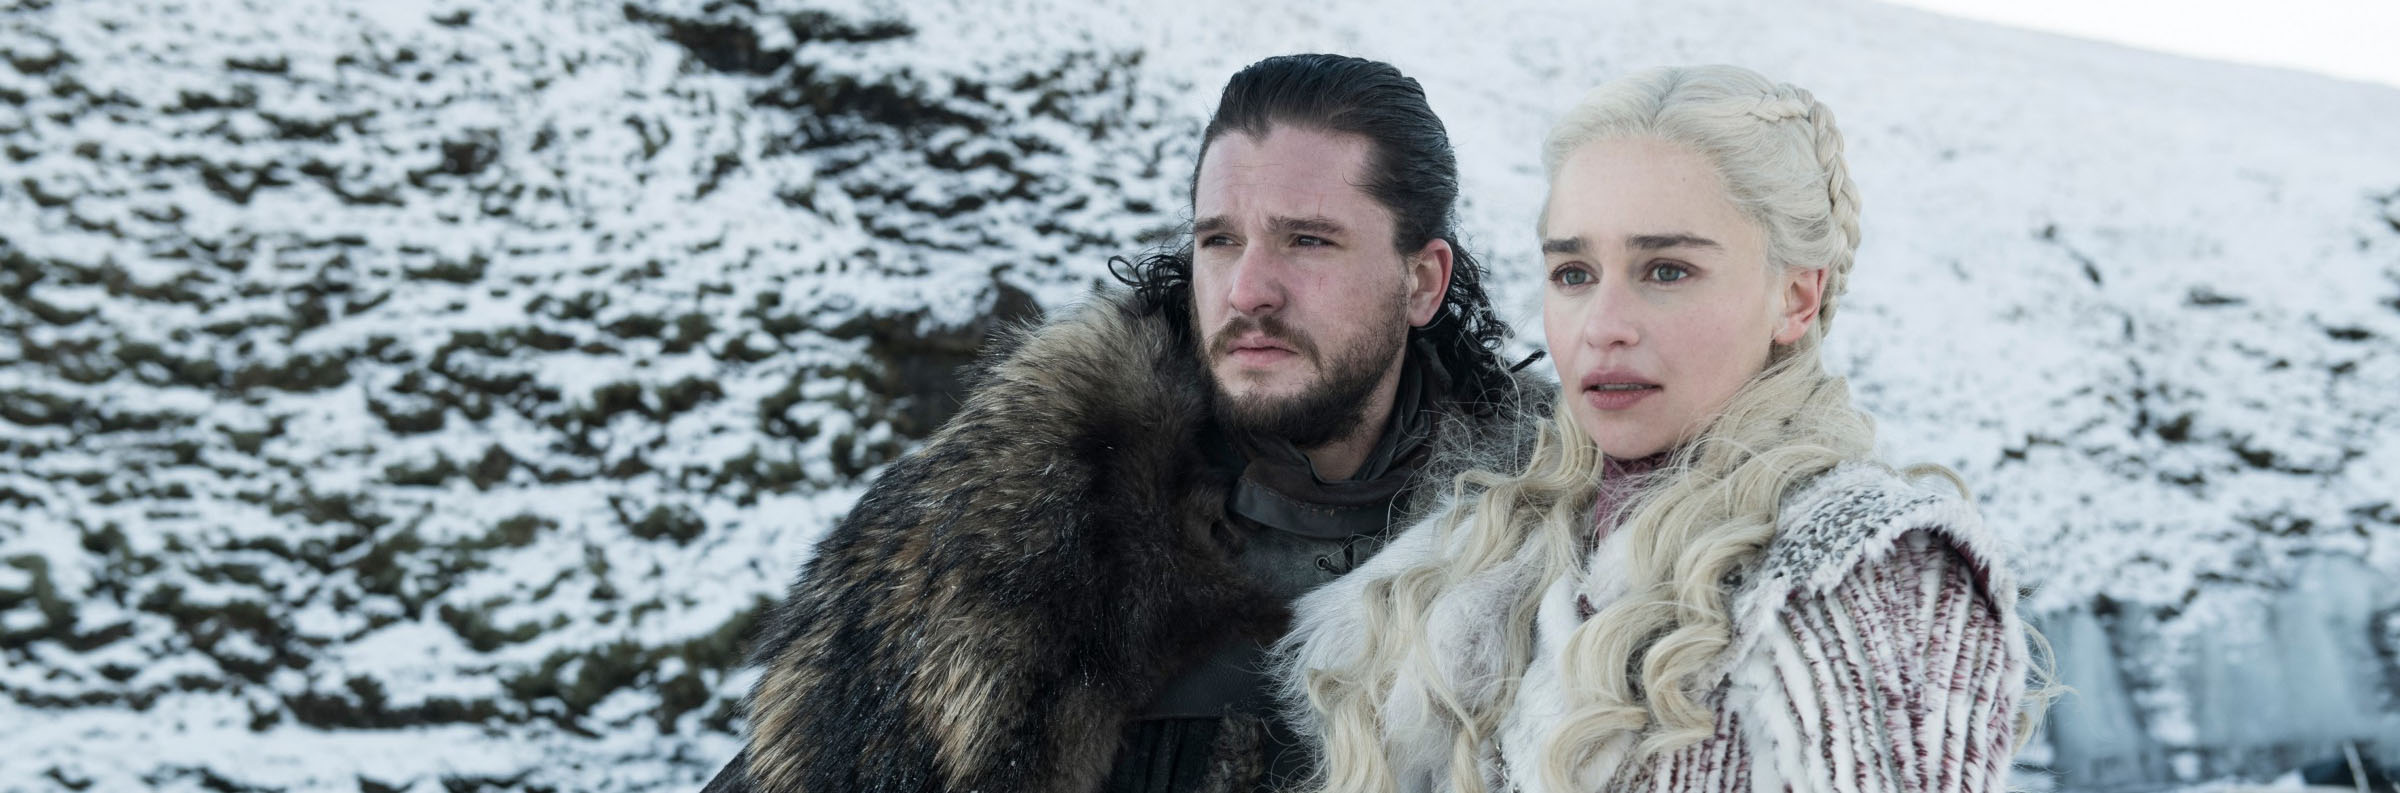 Why You Should Talk about 'Game of Thrones' at Work